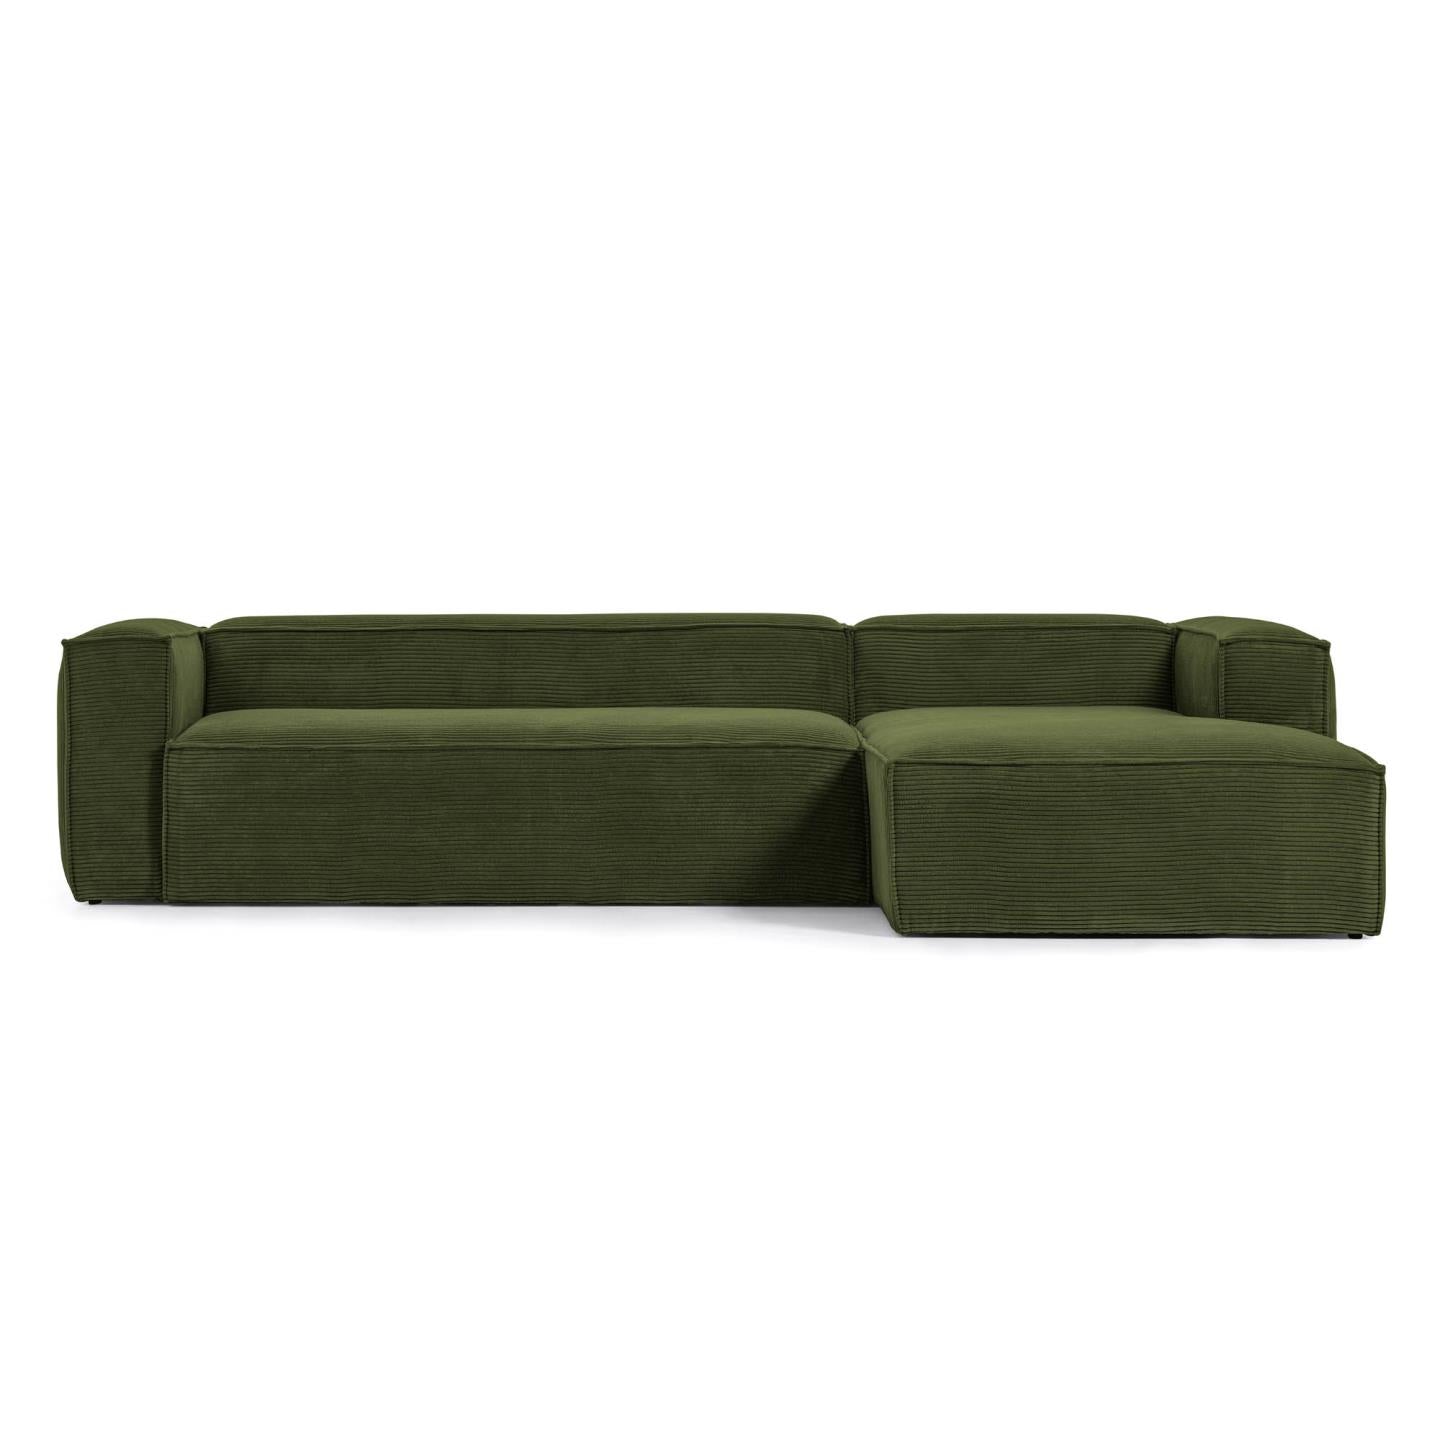 Blok 4 seater sofa with right side chaise longue in green wide seam corduroy, 330 cm